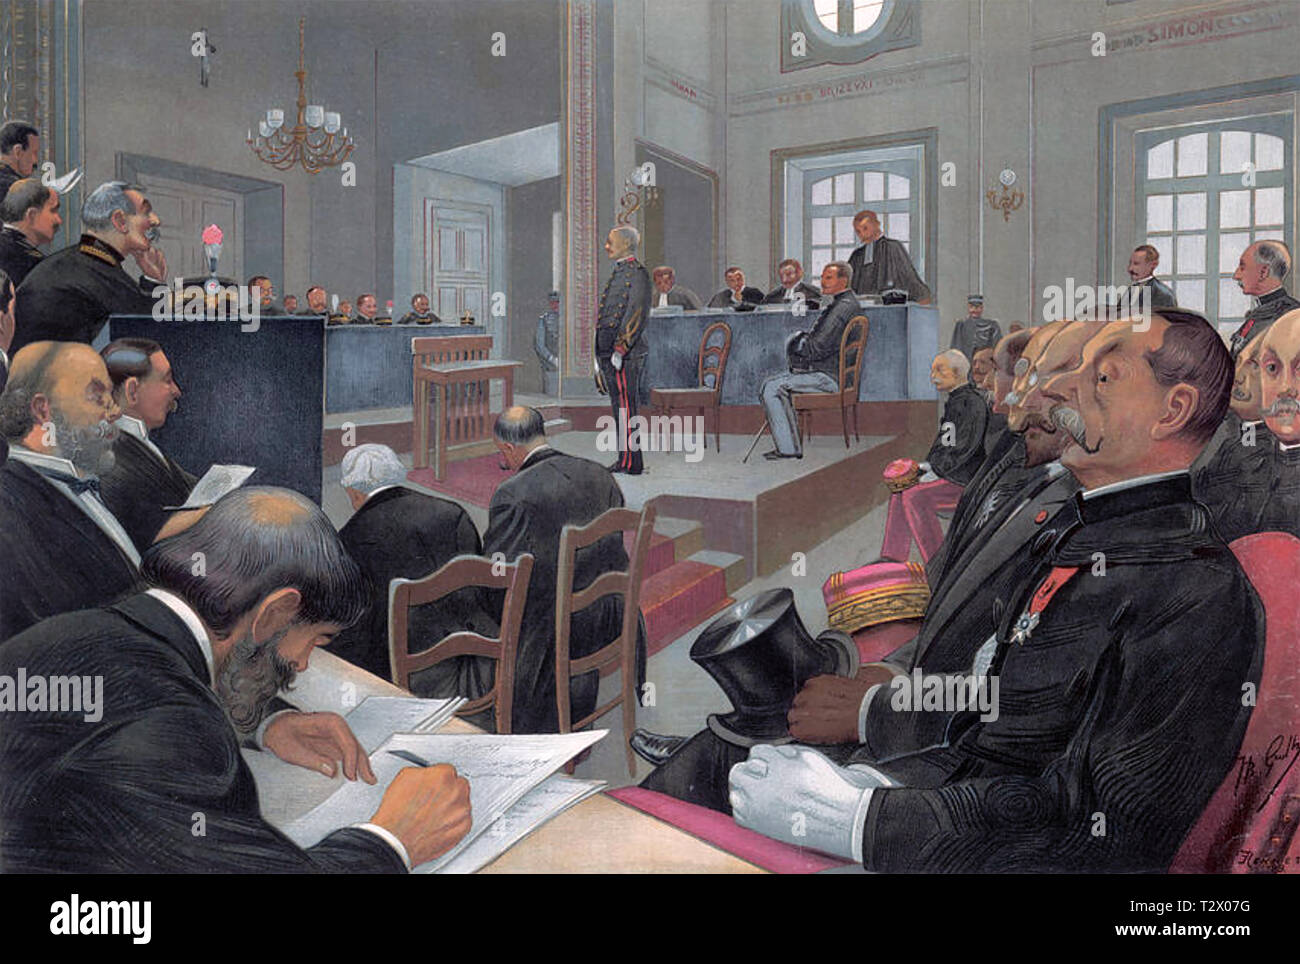 ALFRED DREYFUS (1859-1935) French Army officer at his court martial trial in Rennes in August 1899 Stock Photo